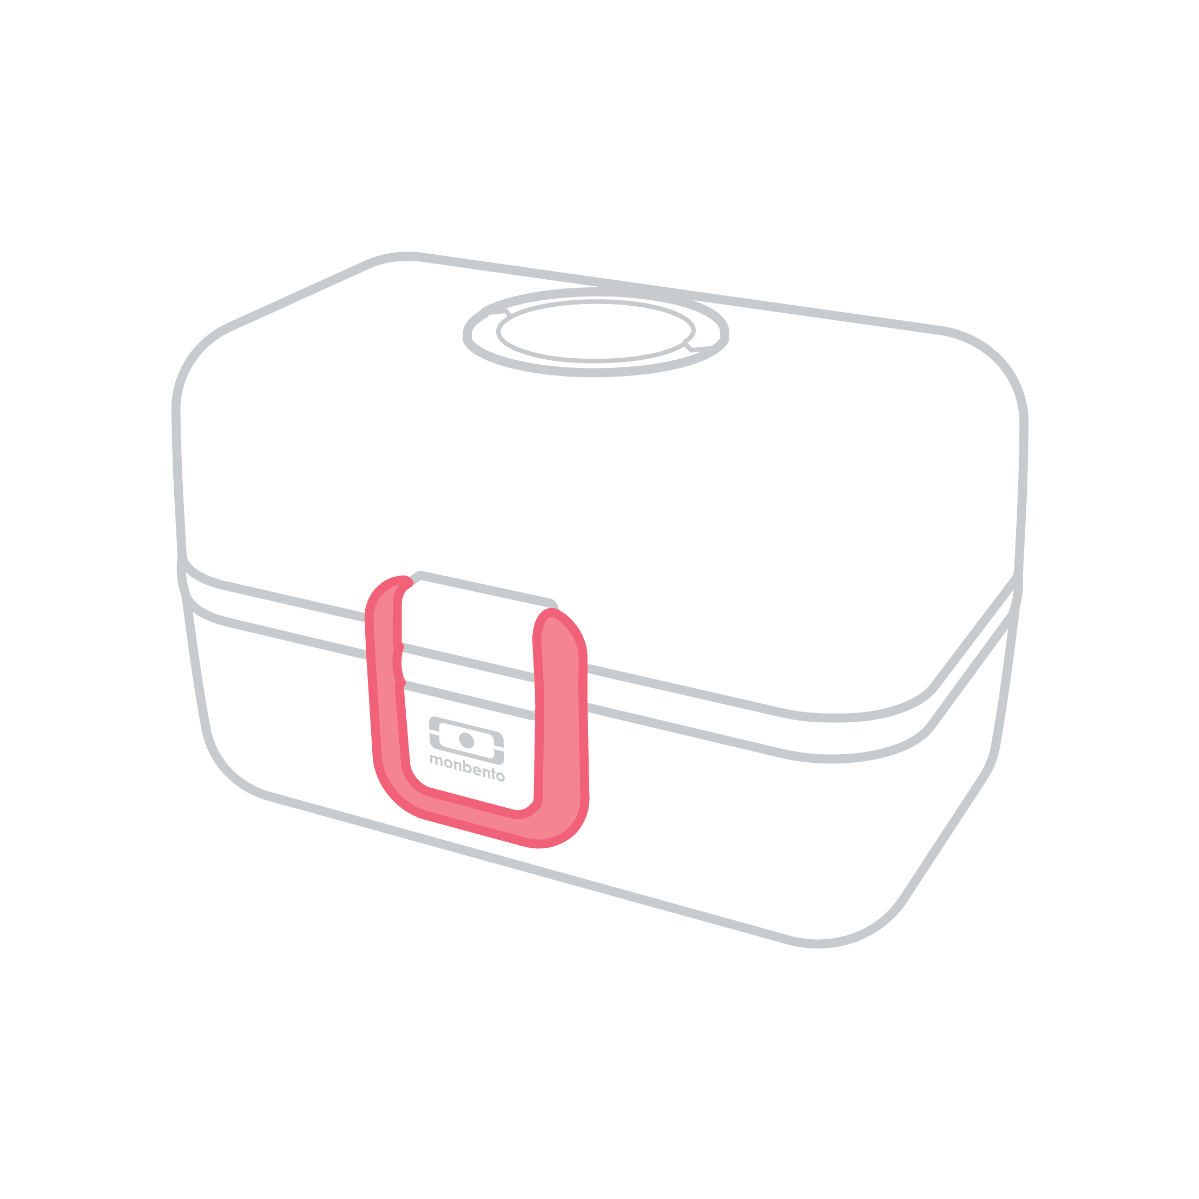 Lunch box lock for mb tresor bento clipart transparent